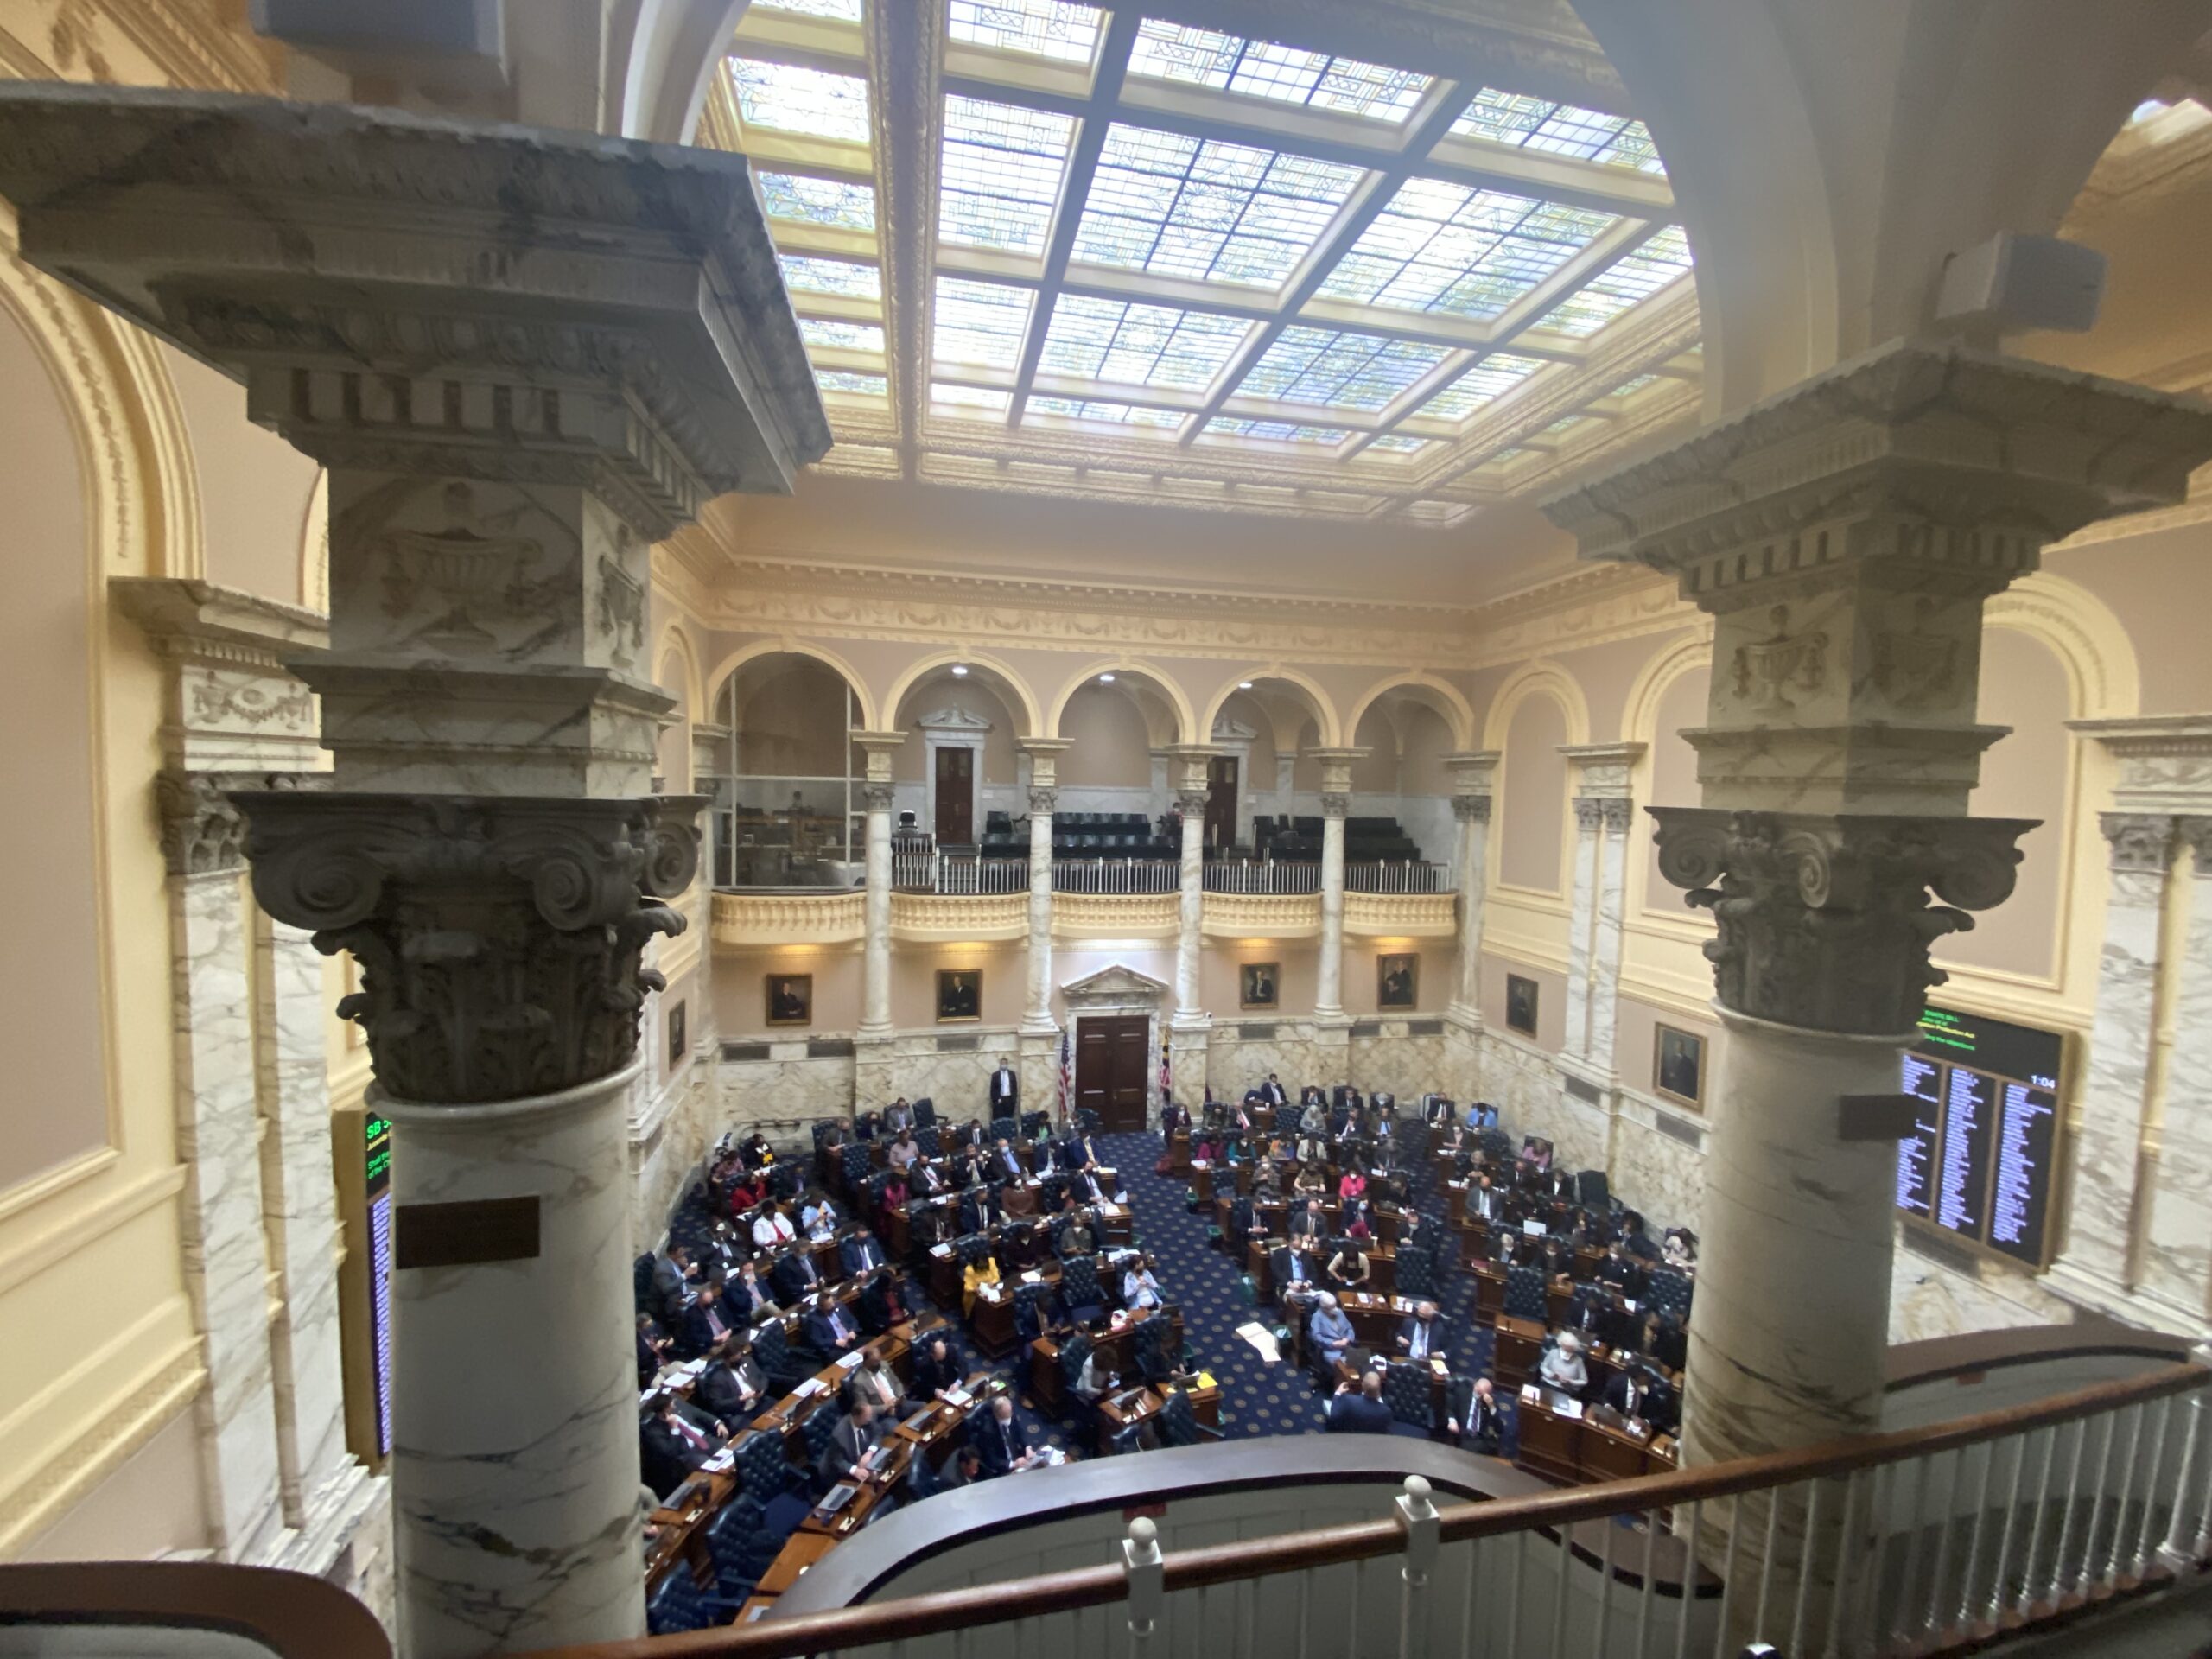 The House of Delegates chamber as seen from the gallery.